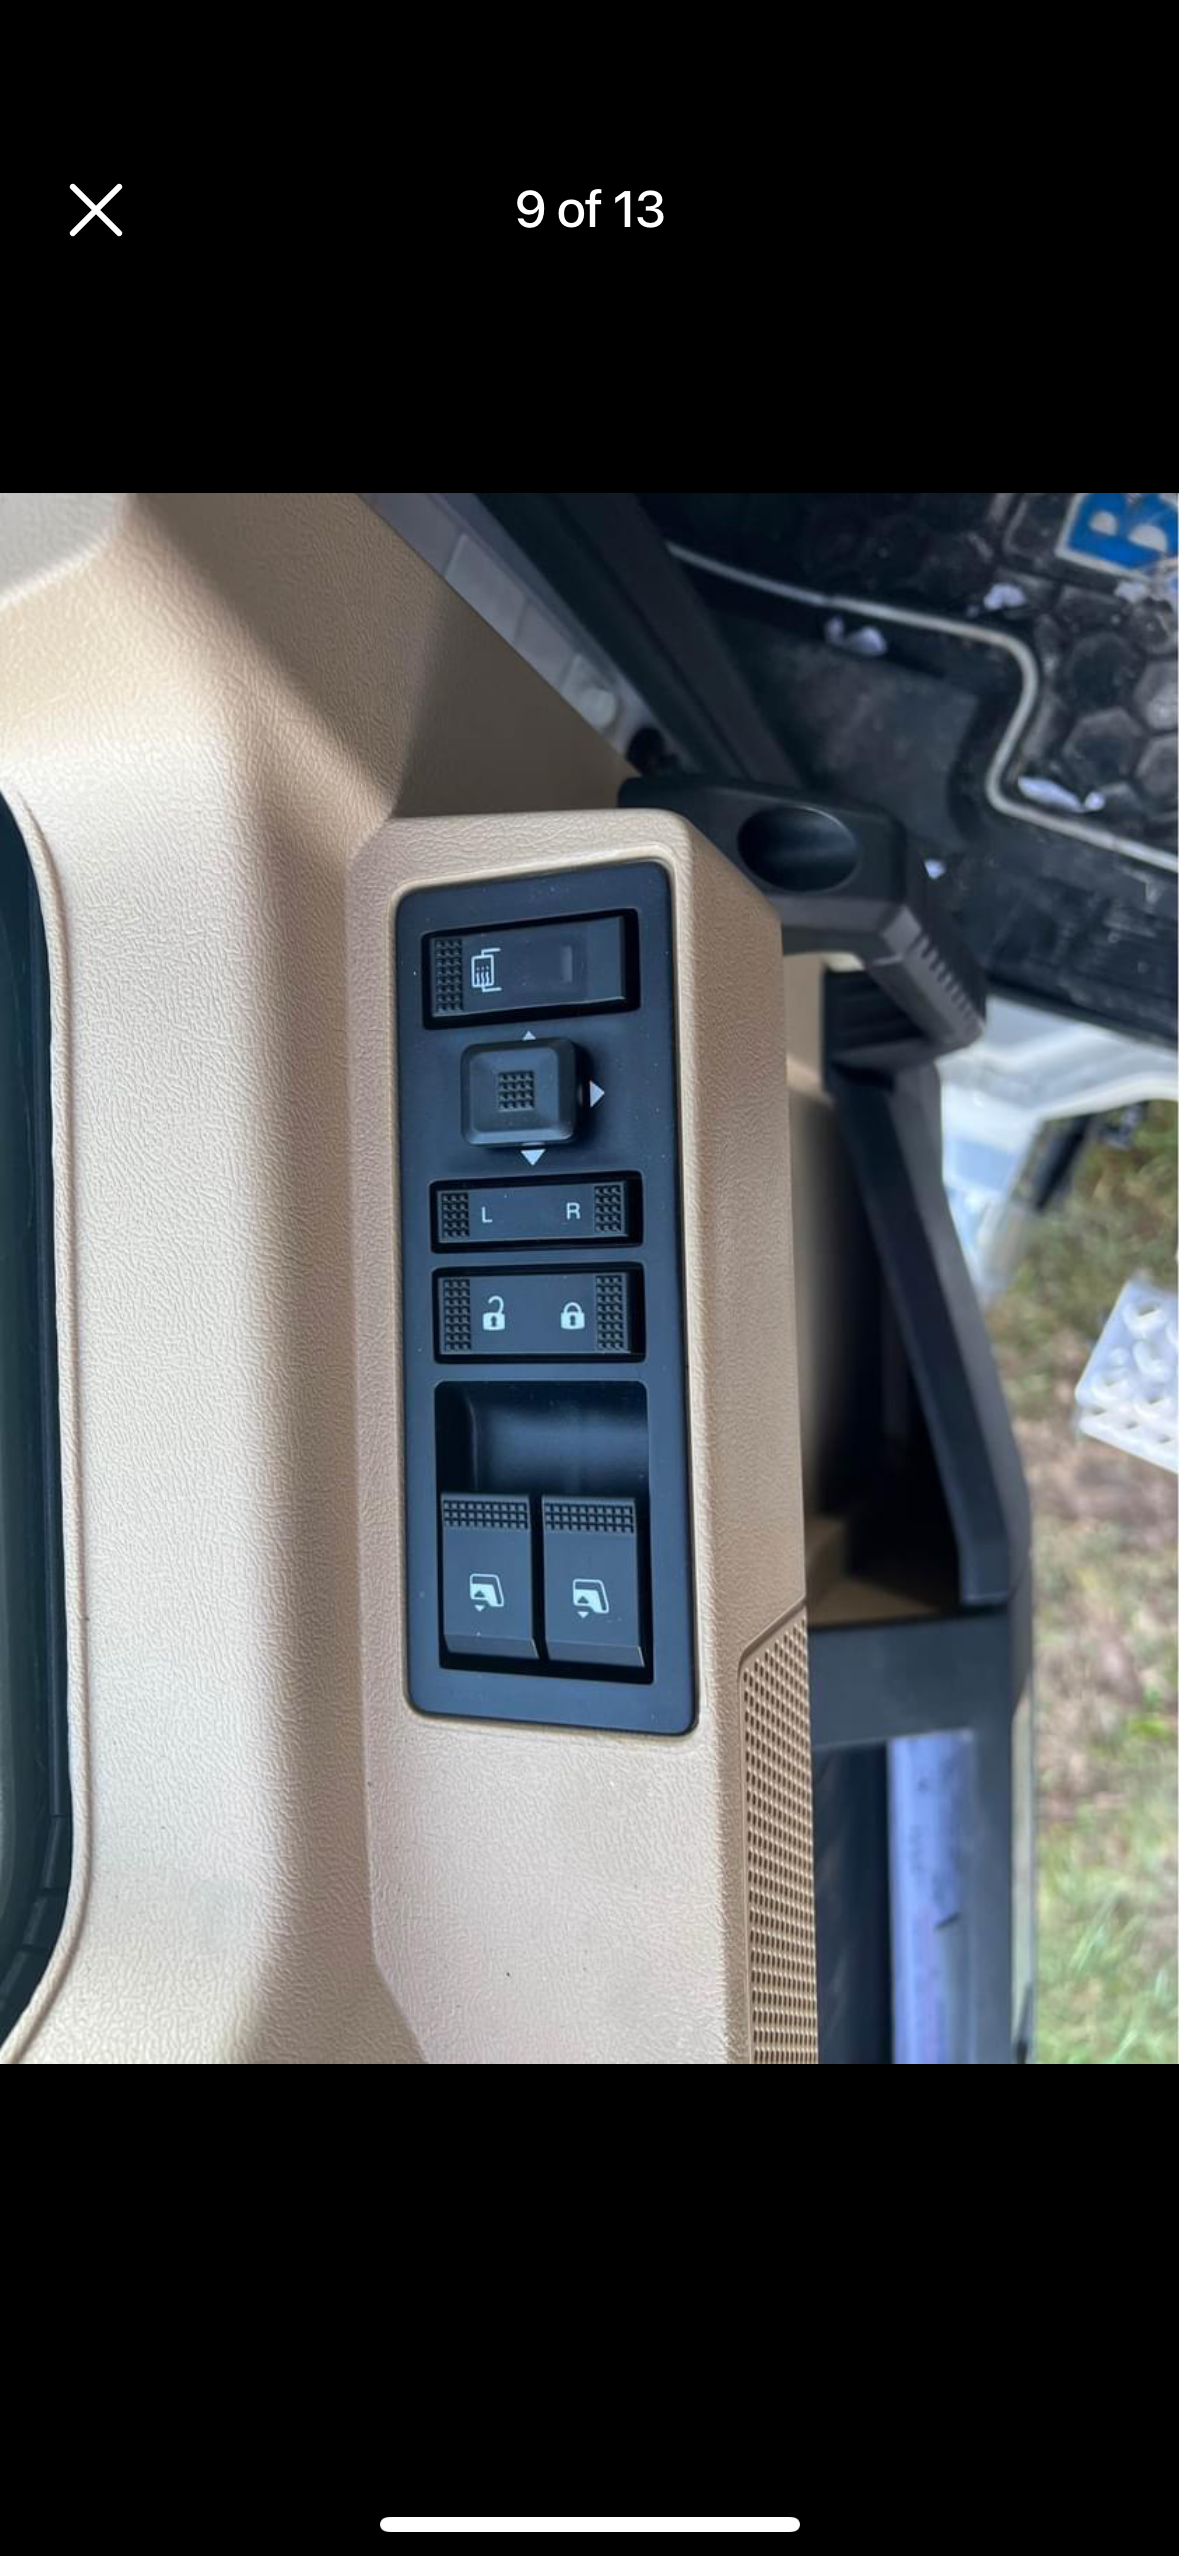 A picture of a window switch on a car.